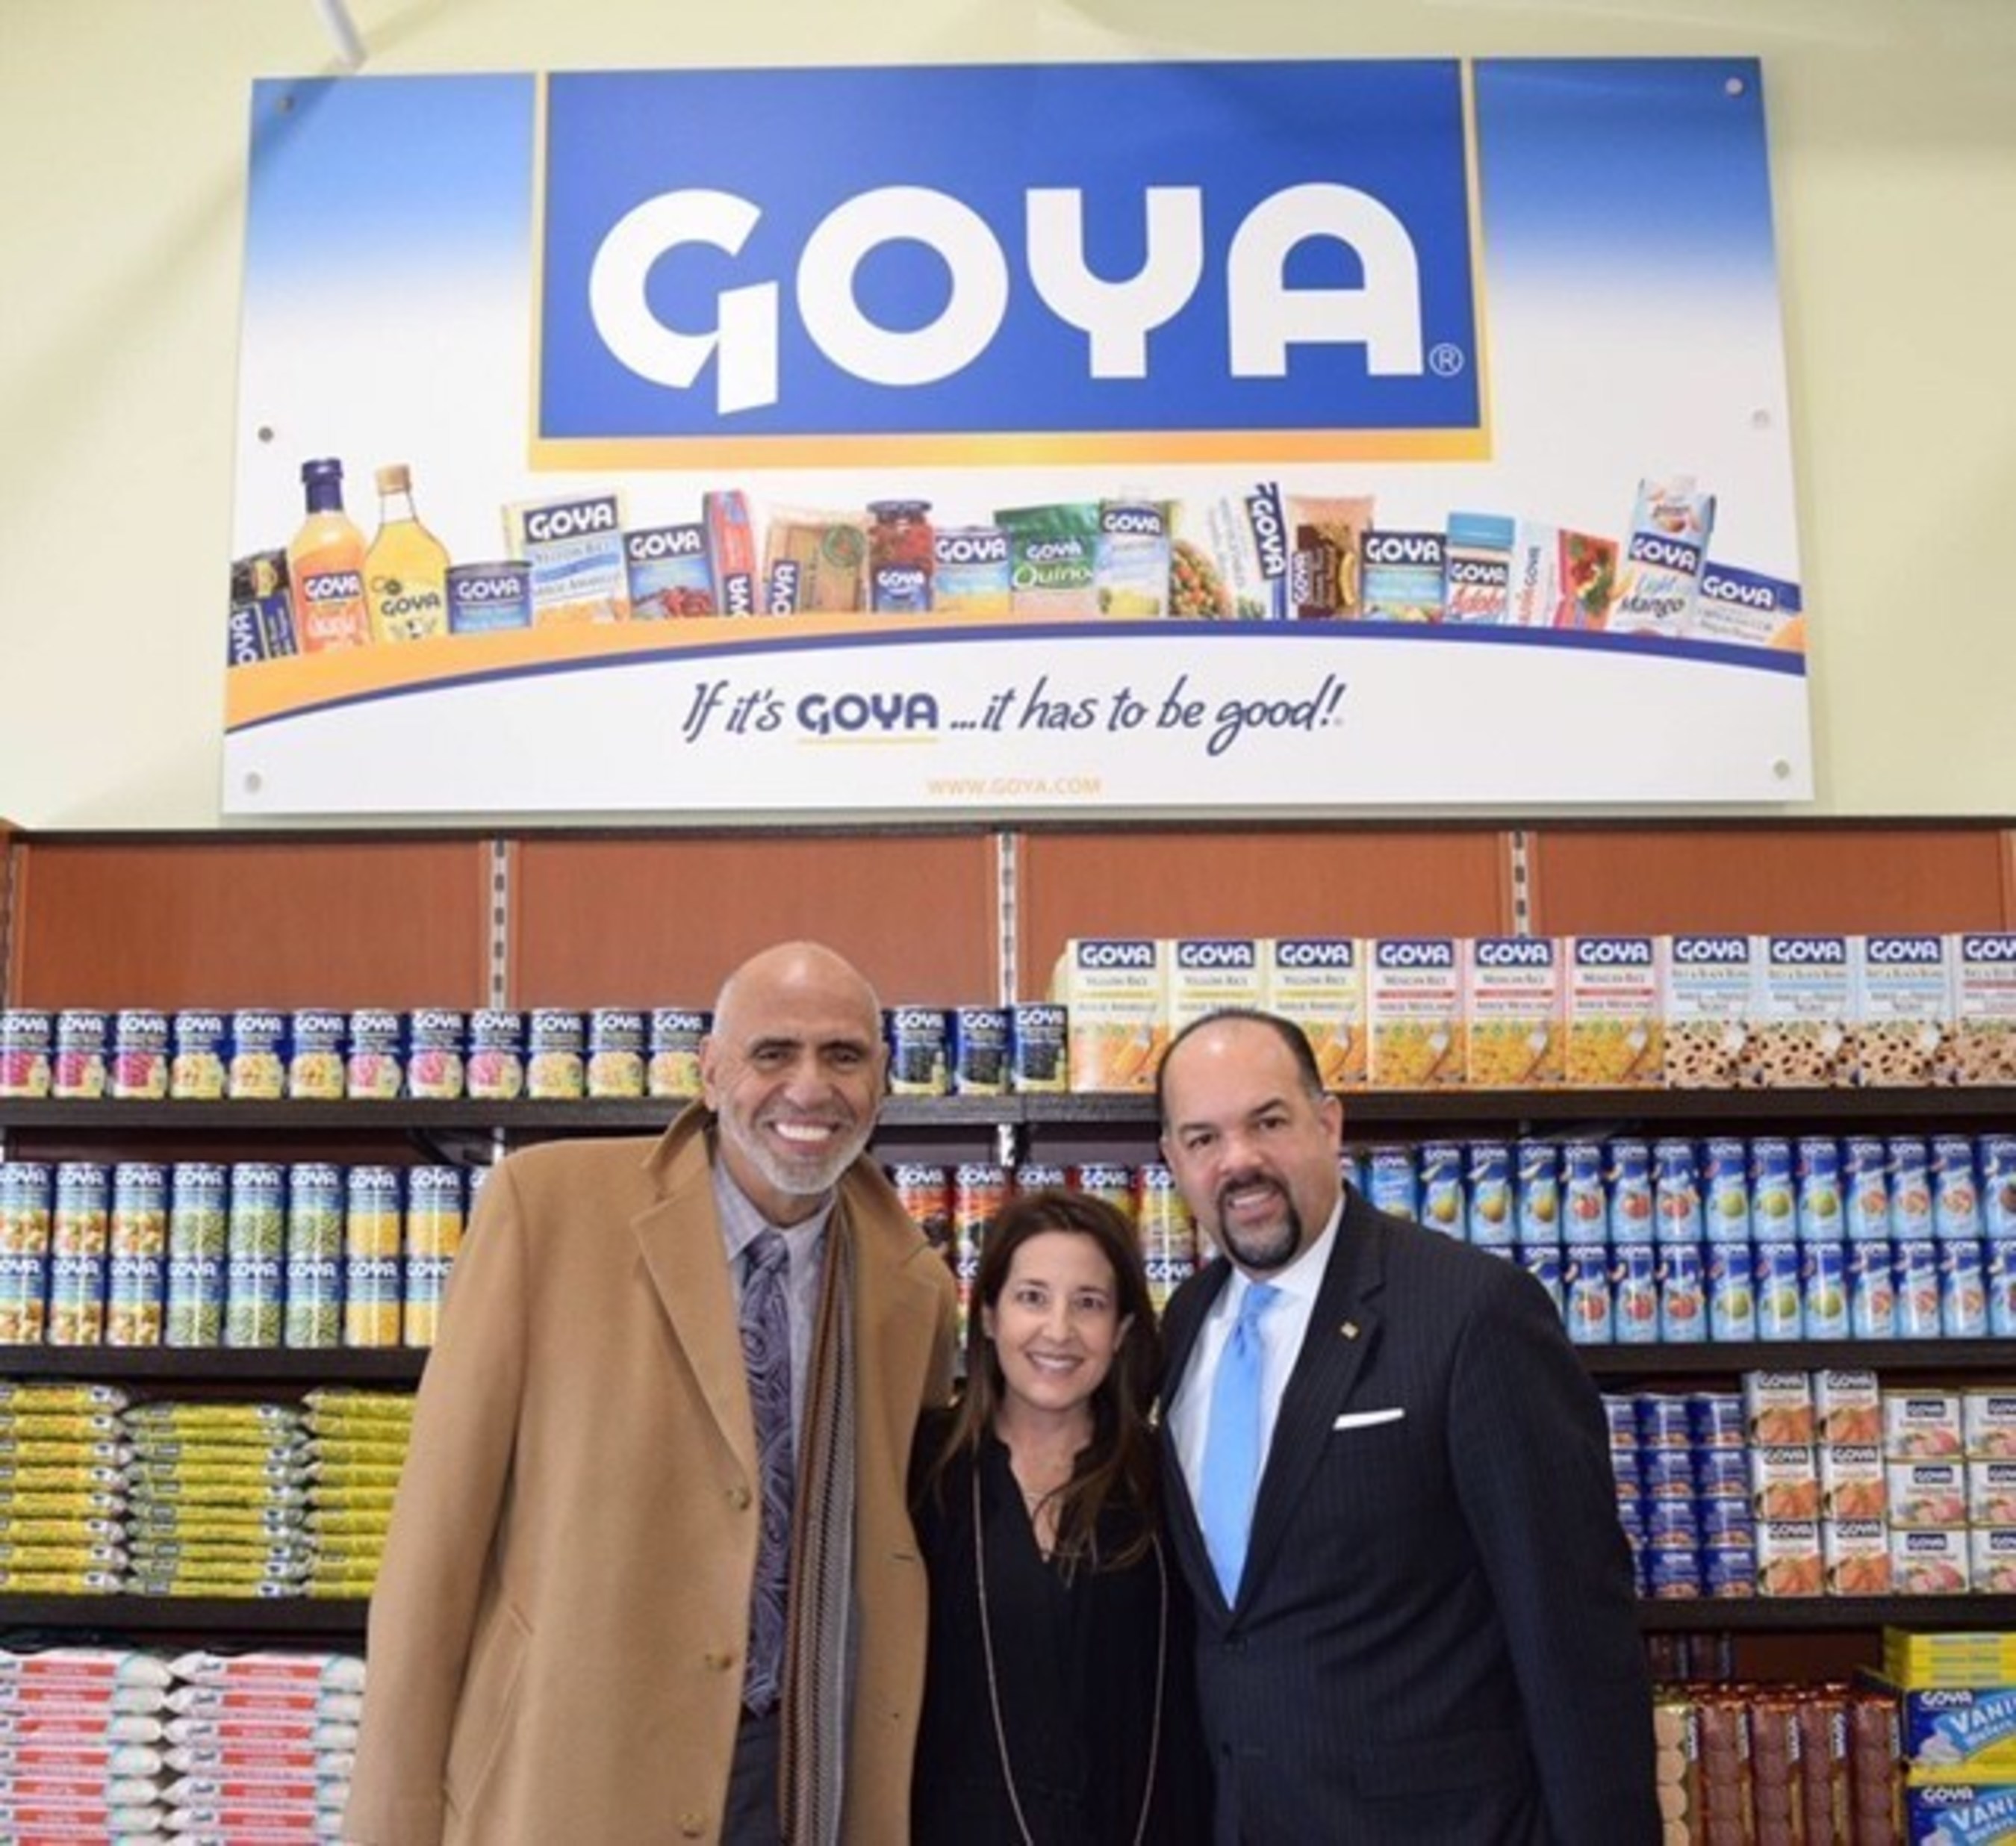 Rafael Toro, Director of Public Relations of Goya Foods; Marie Unanue; and Luis Tejada, Vice President of Goya Foods at the People's Pantry in Toms River, New Jersey